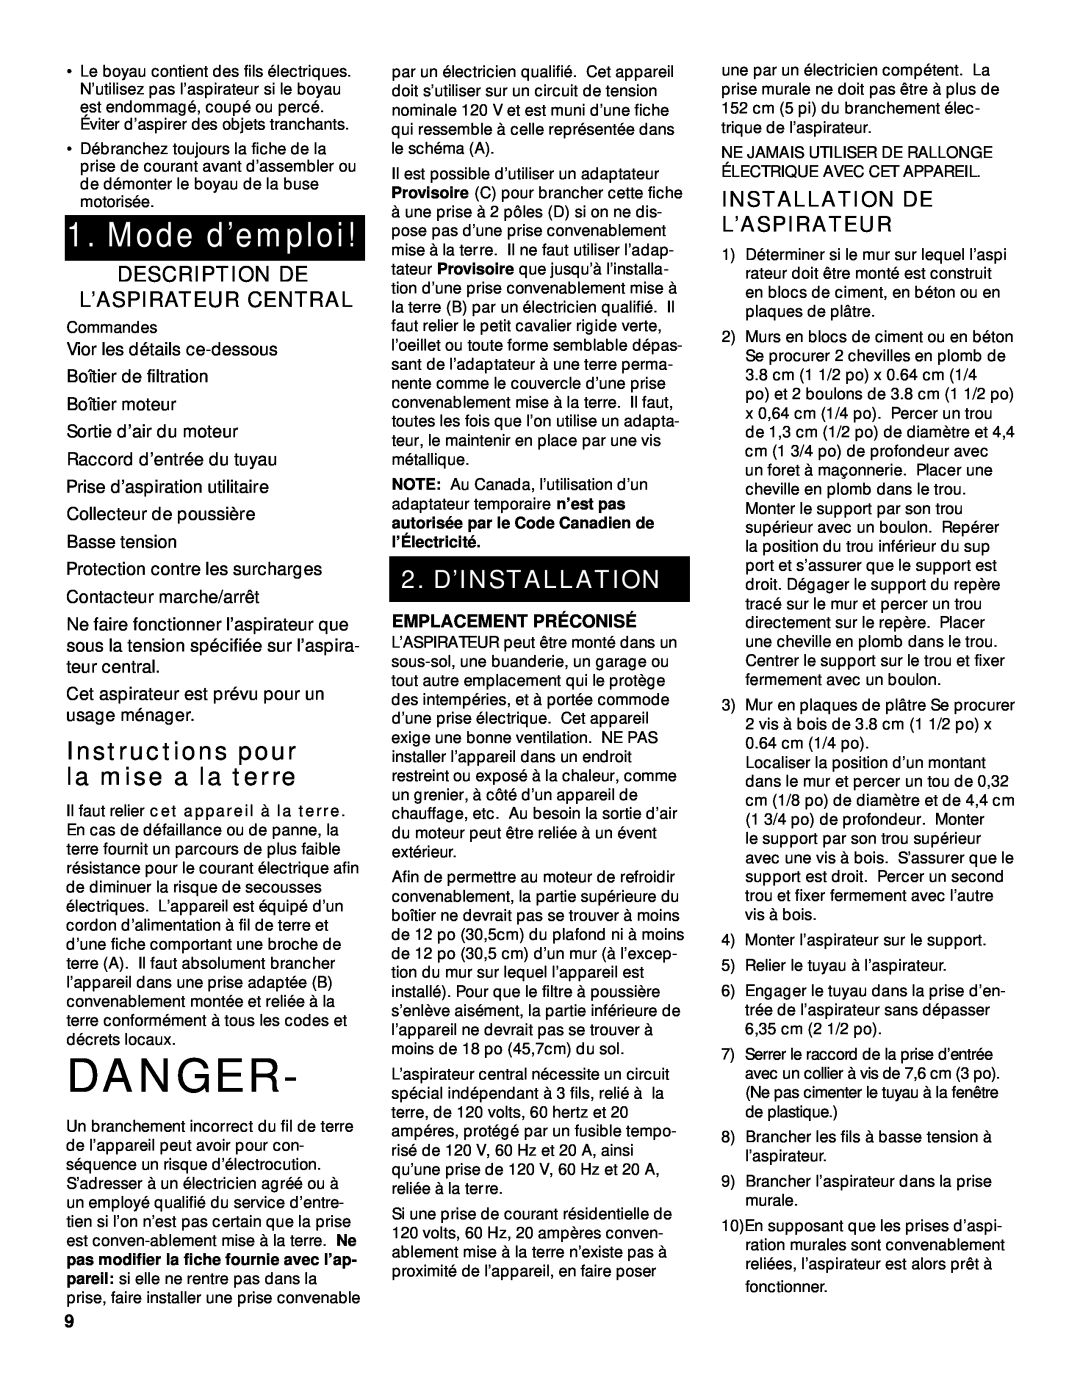 Hoover Central Vacuum Systems Instructions pour la mise a la terre, Description De L’ A S P I R Ateur Central, Danger 